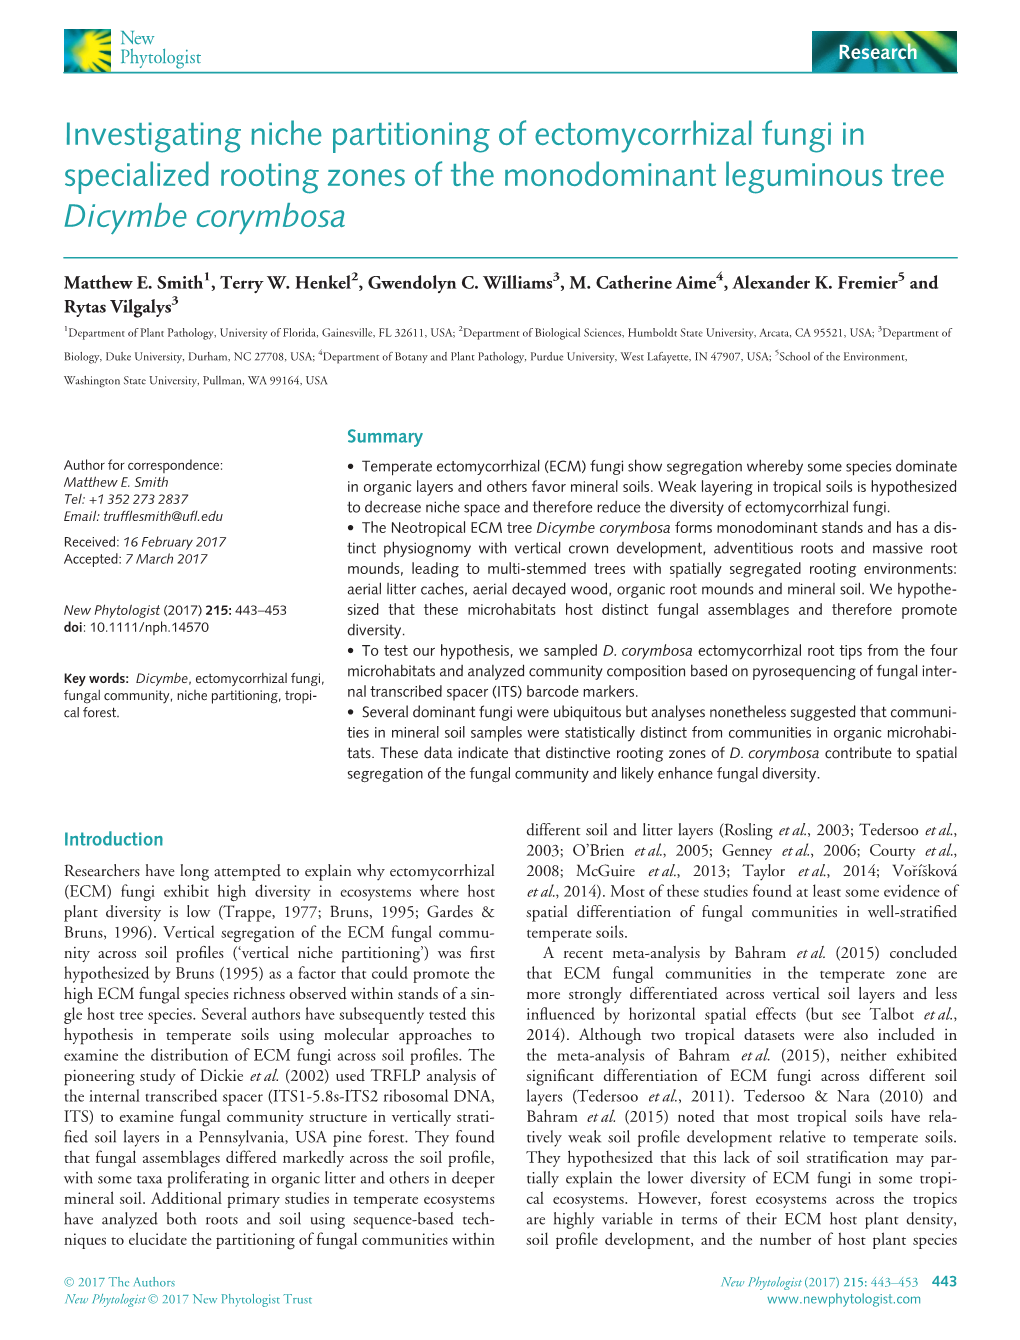 Investigating Niche Partitioning of Ectomycorrhizal Fungi in Specialized Rooting Zones of the Monodominant Leguminous Tree Dicymbe Corymbosa